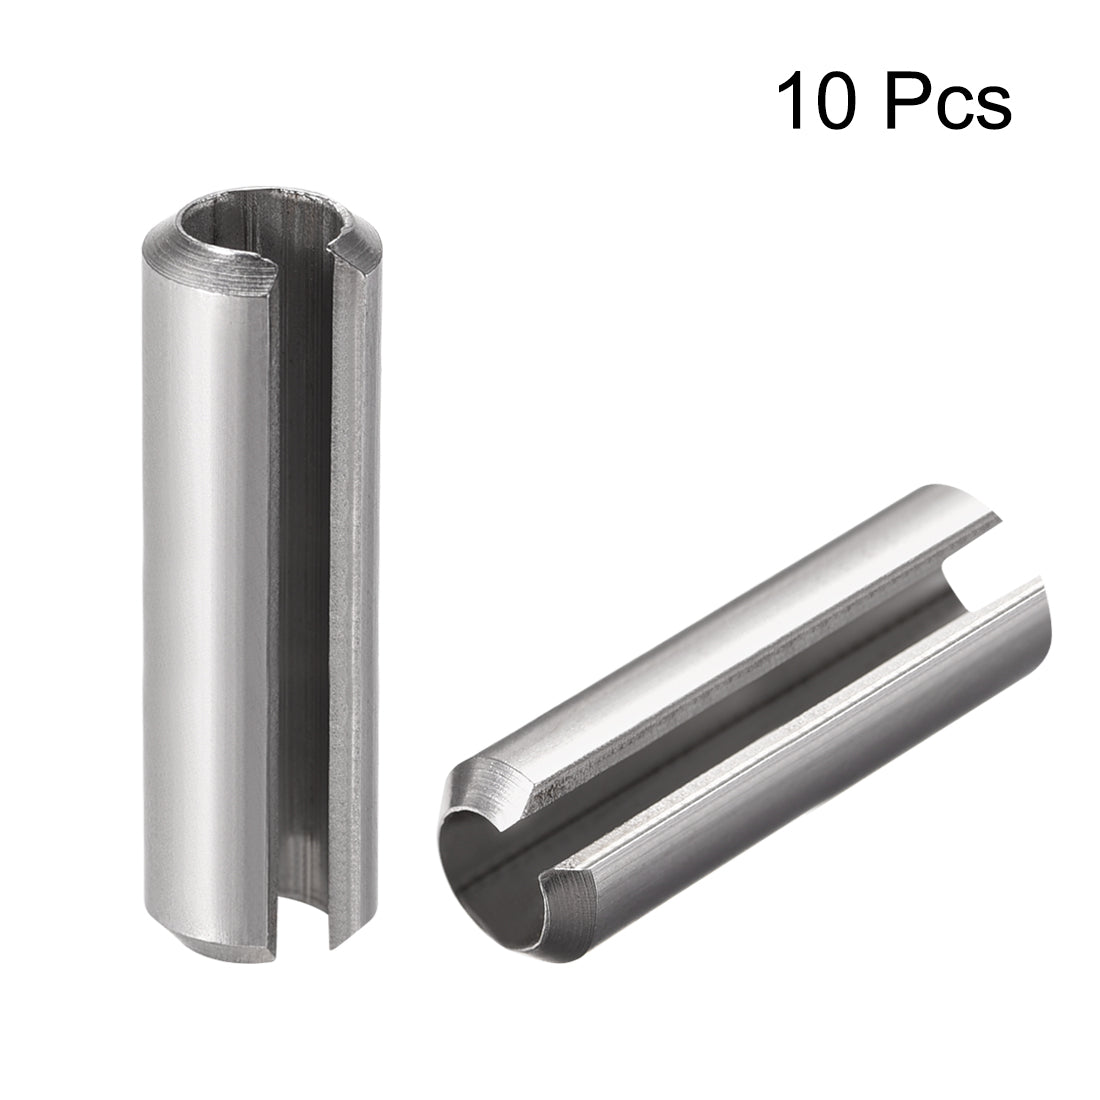 Uxcell Uxcell M8 x 35mm 304 Stainless Steel Split Spring Roll Dowel Pins Plain Finish 10Pcs